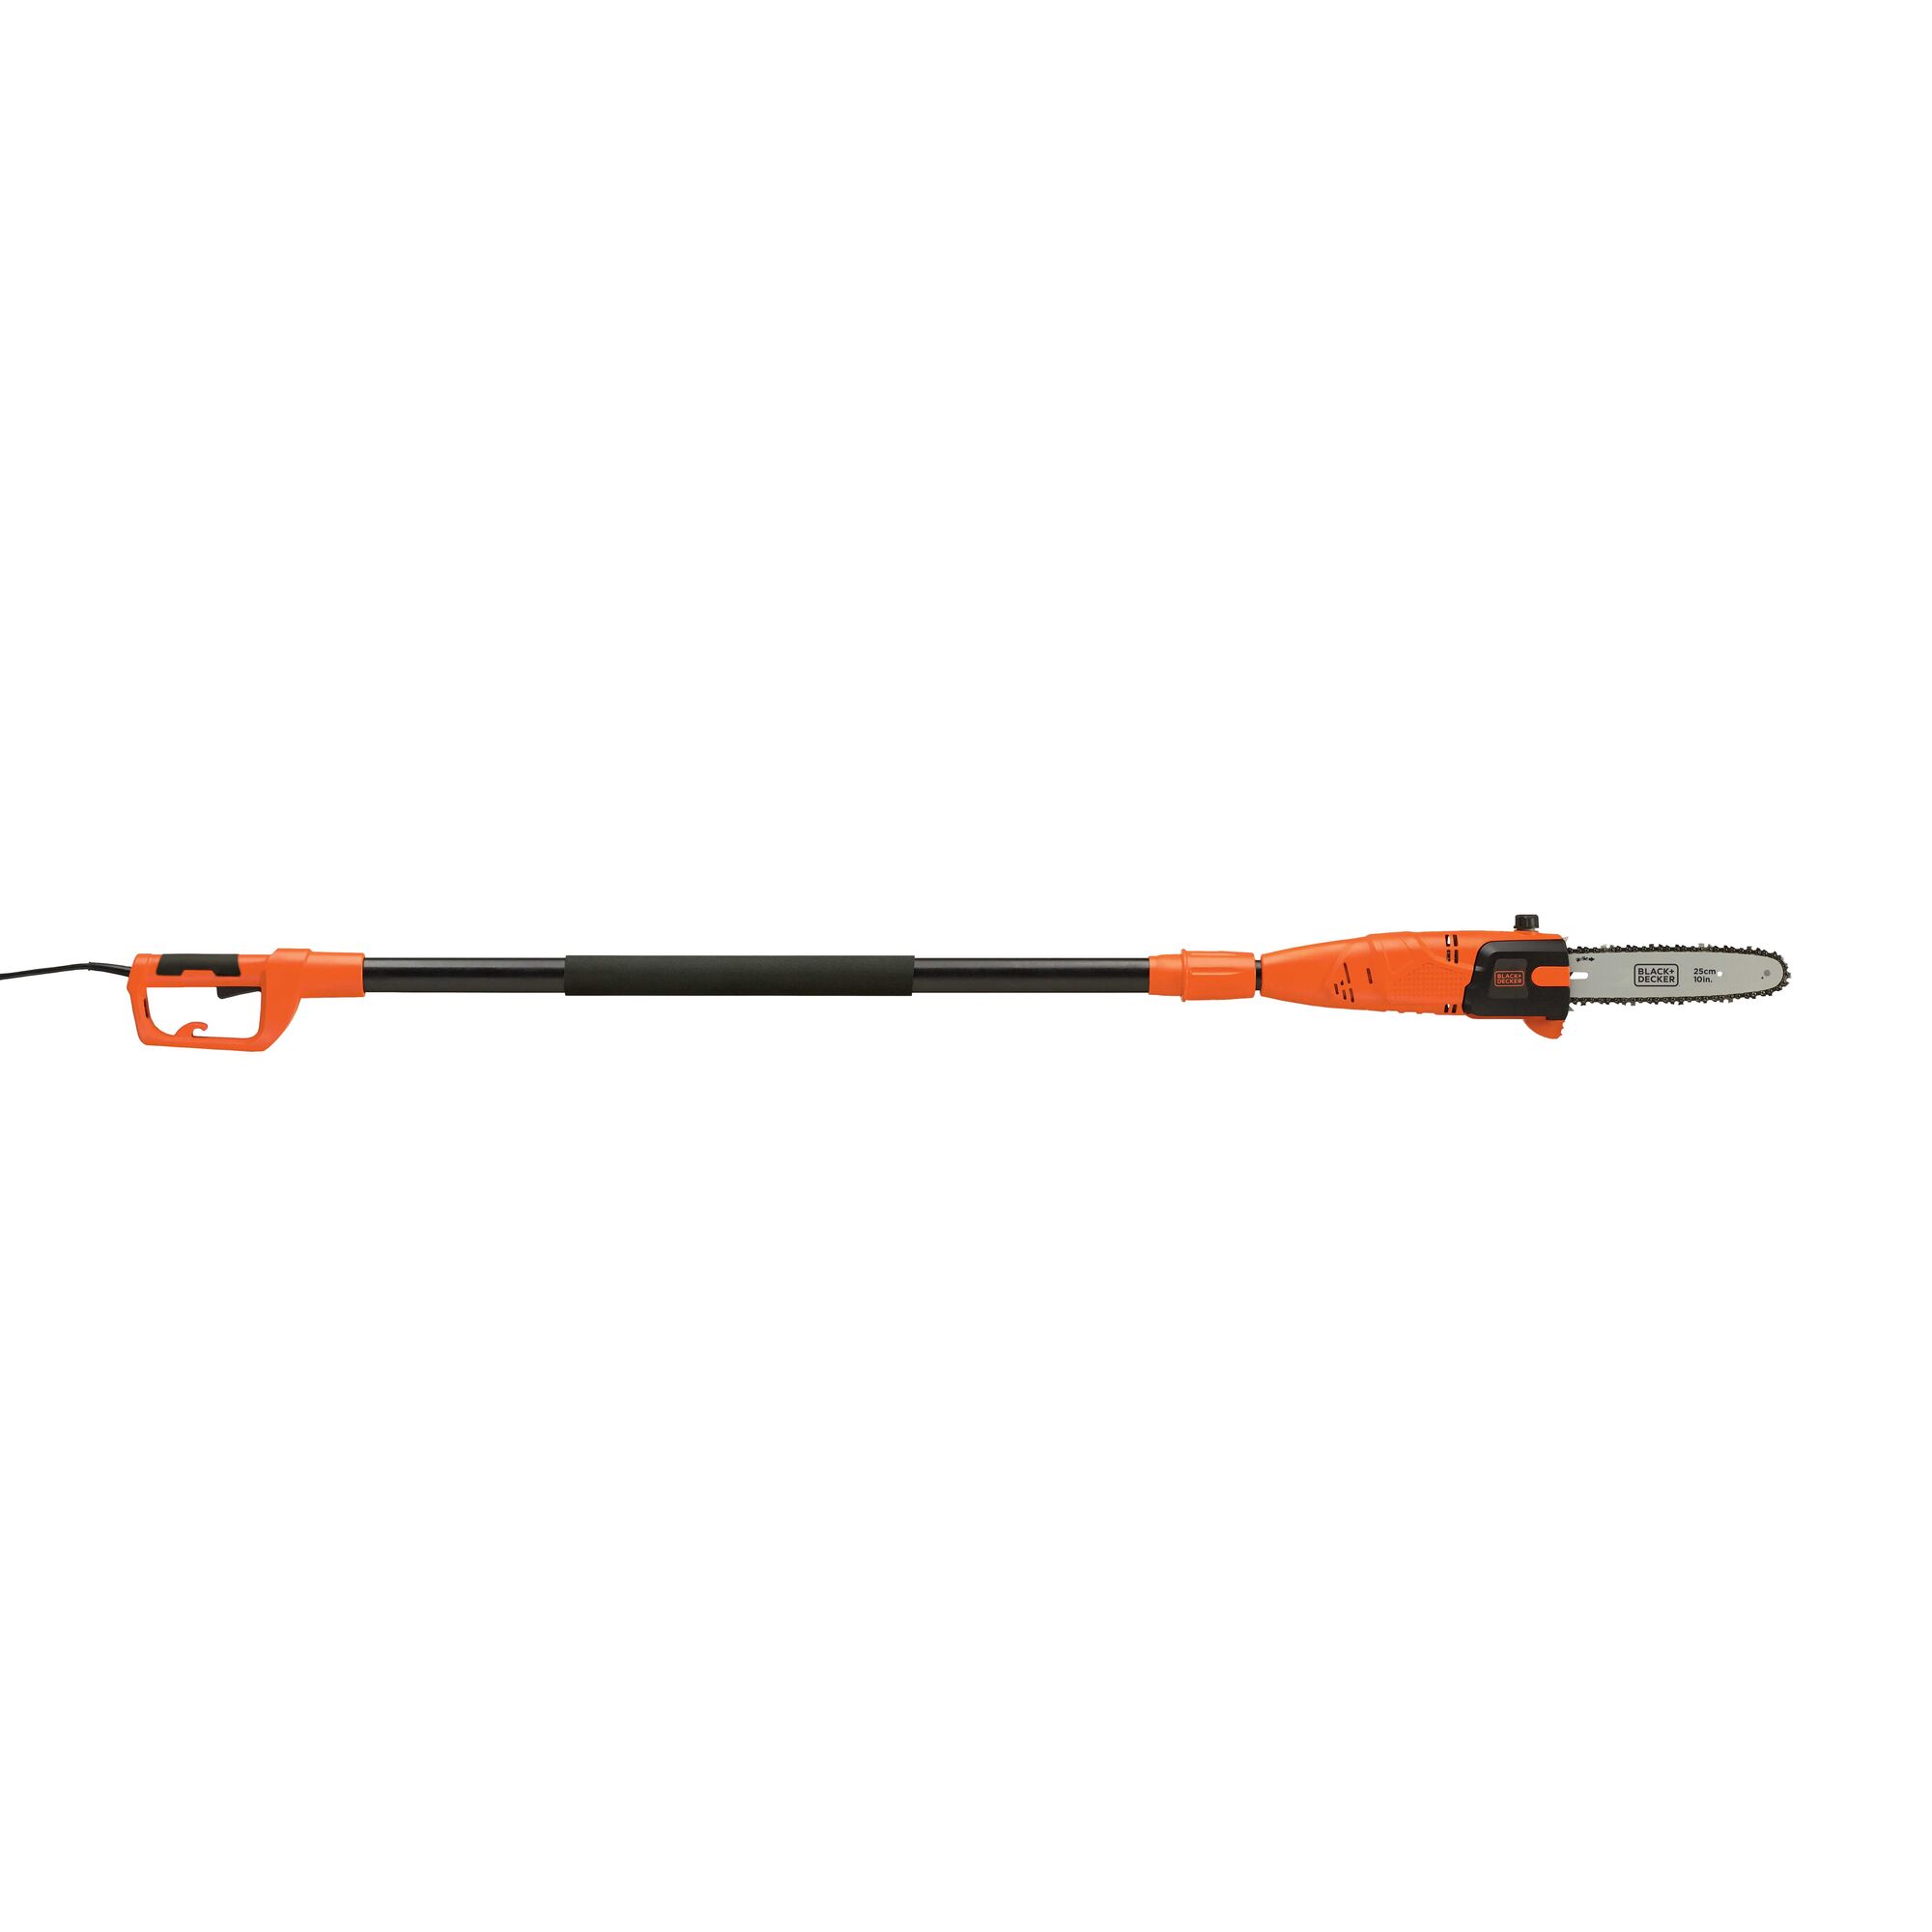 6.5 Amp 9-1/2 foot Pole Saw on white background.